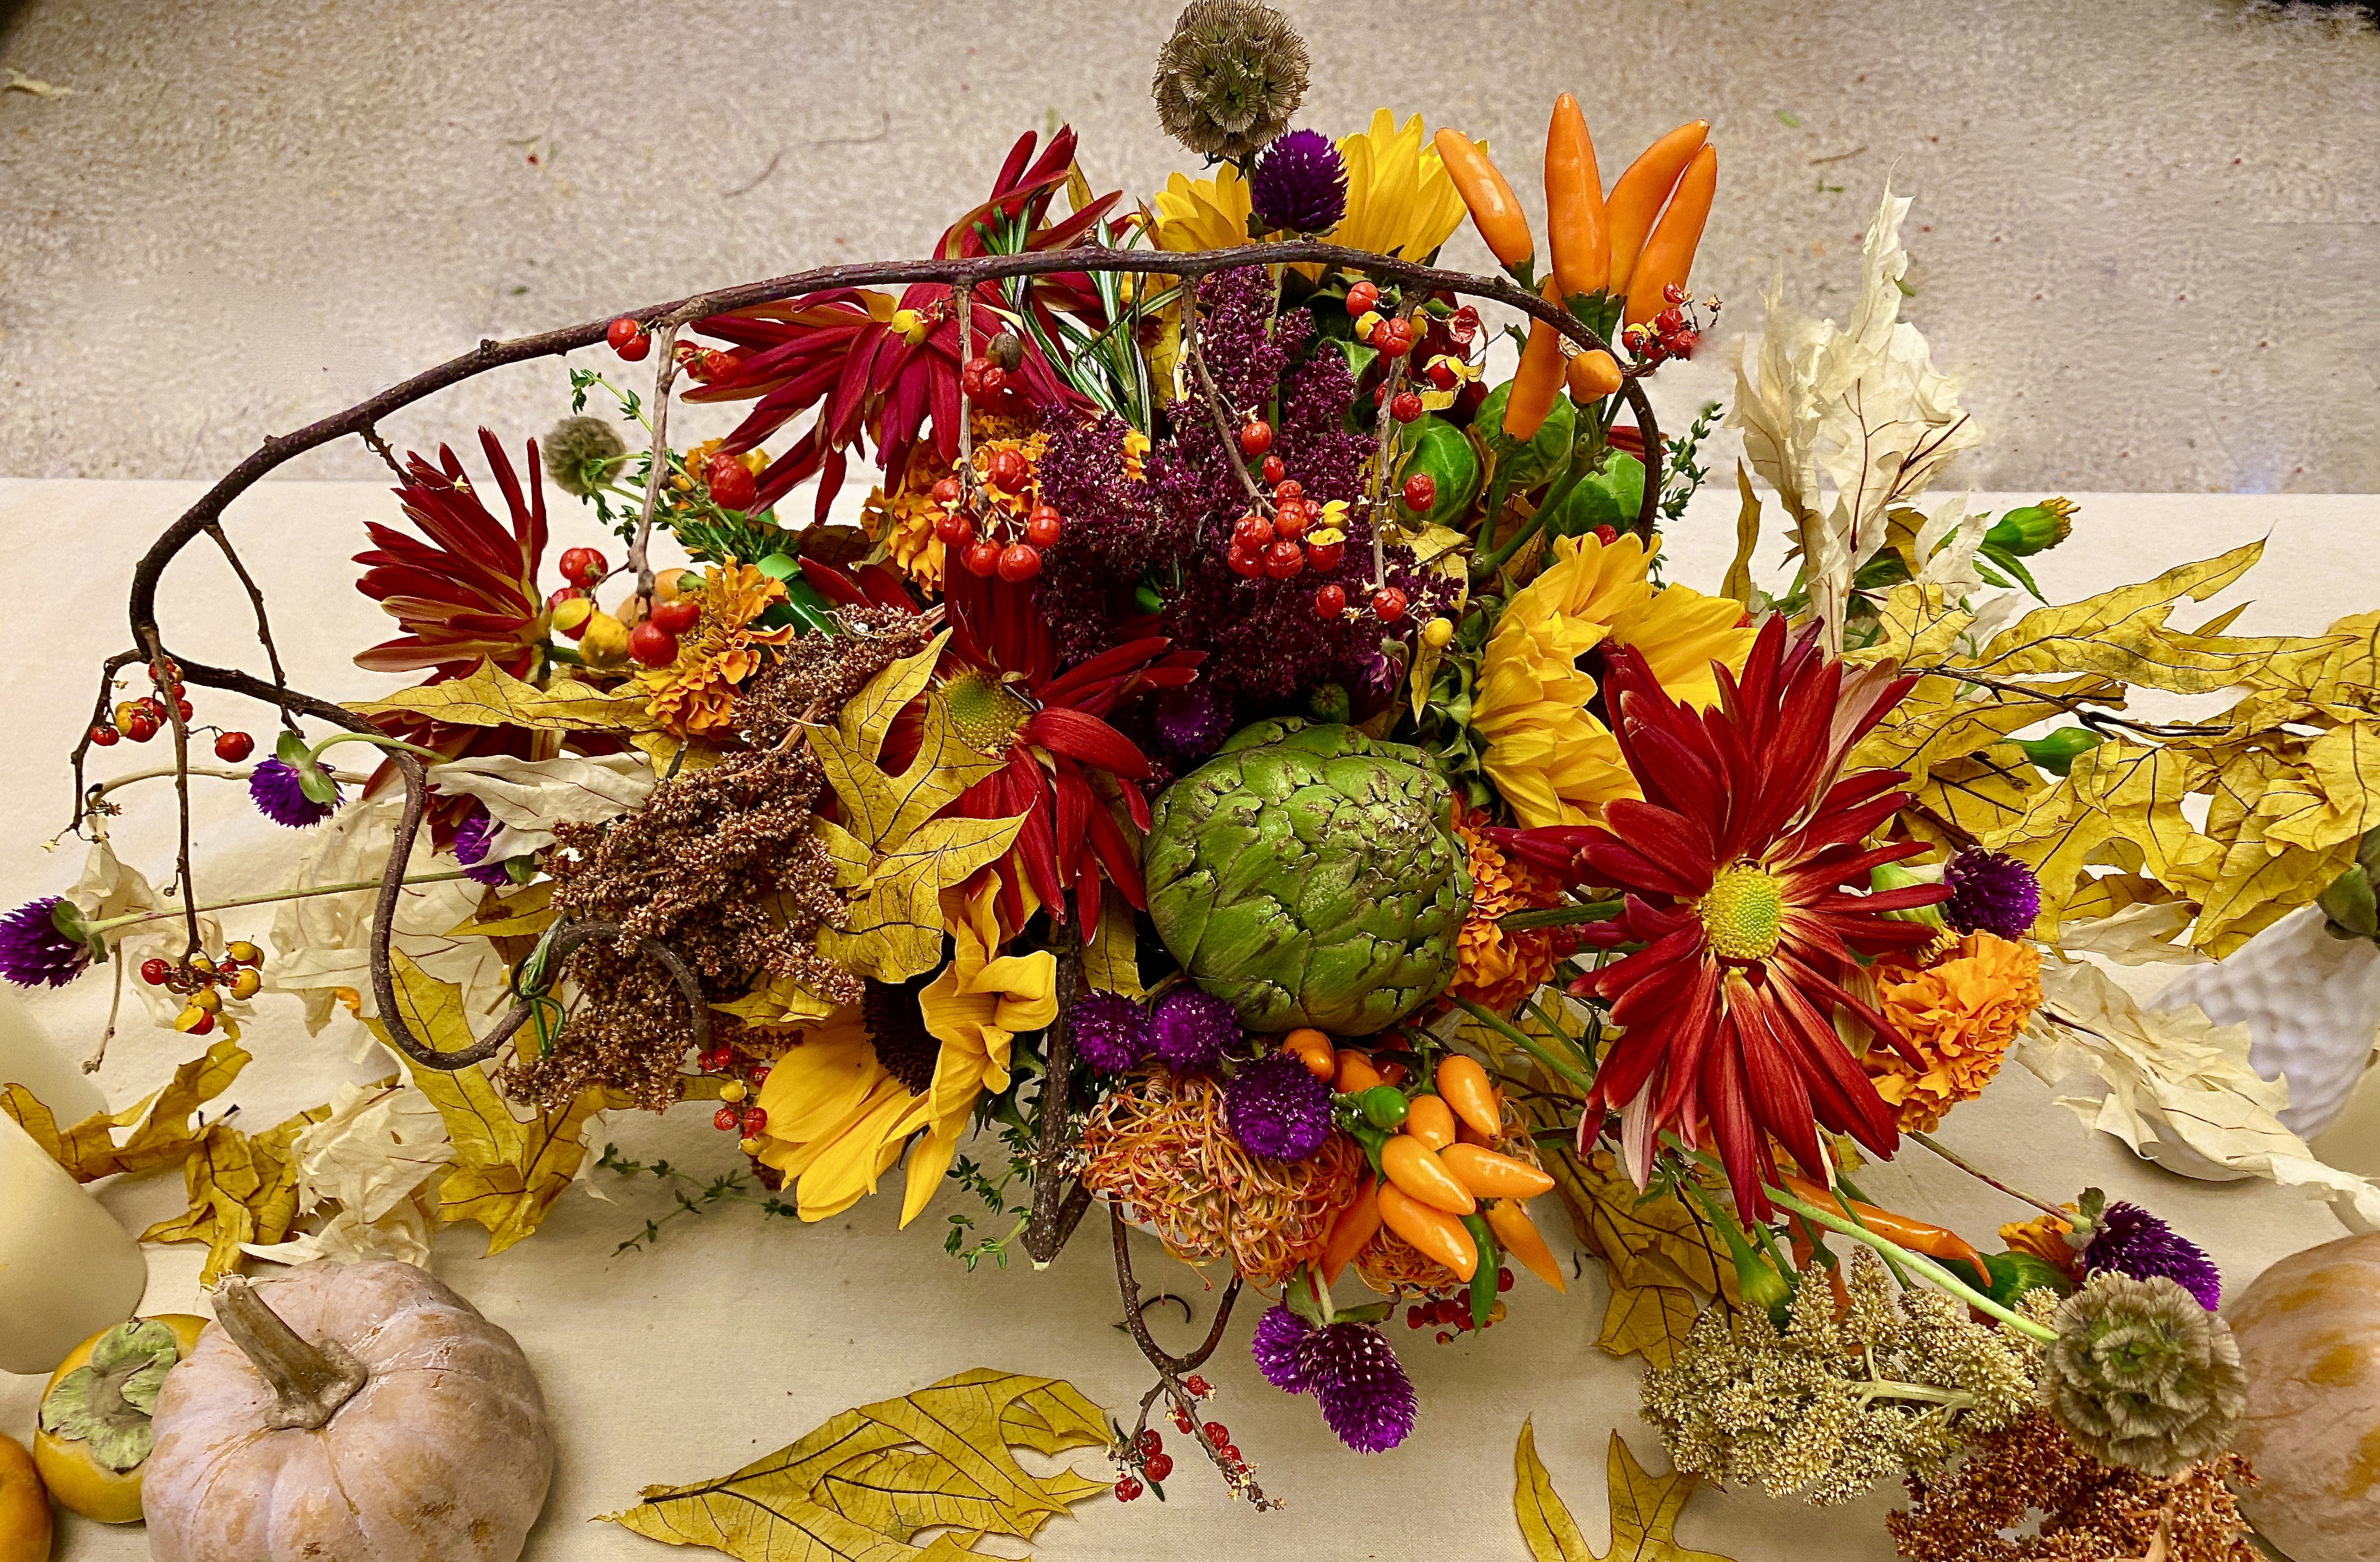 Image of a festive thanksgiving centerpiece, using florals and twigs and other unusual items